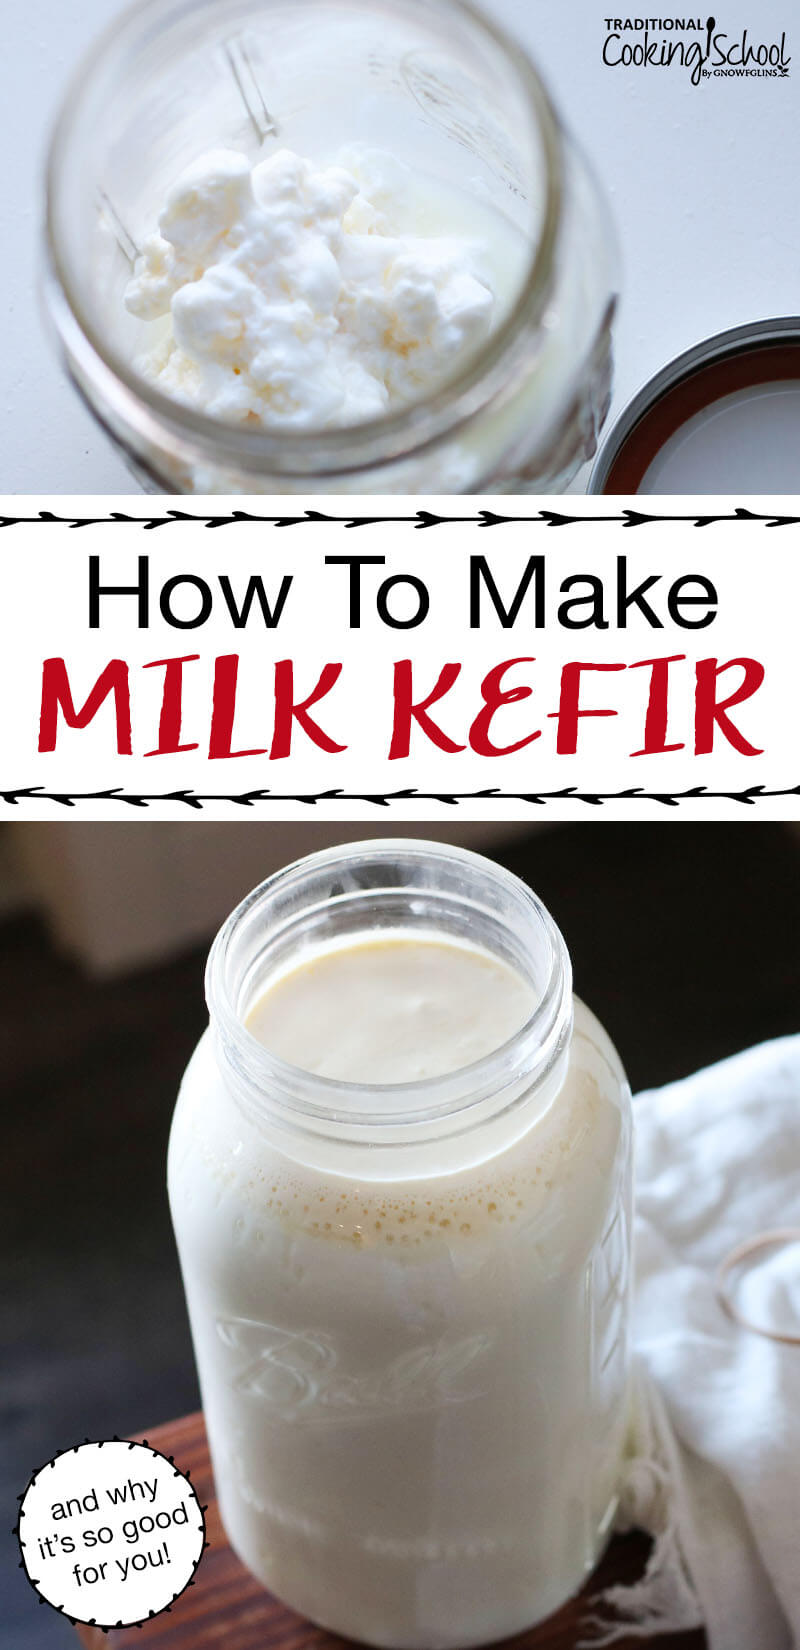 How To Make Milk Kefir (and why it's so good for you!) | We are really enjoying kefir! Its fresh and slightly sour taste reminds me of plain yogurt, which is a staple in Middle Eastern cooking. A side benefit (that I didn't expect) of having cultured foods around -- foods that satisfy me and replace my cravings for sweeteners. Kefir fits the bill! | TraditionalCookingSchool.com